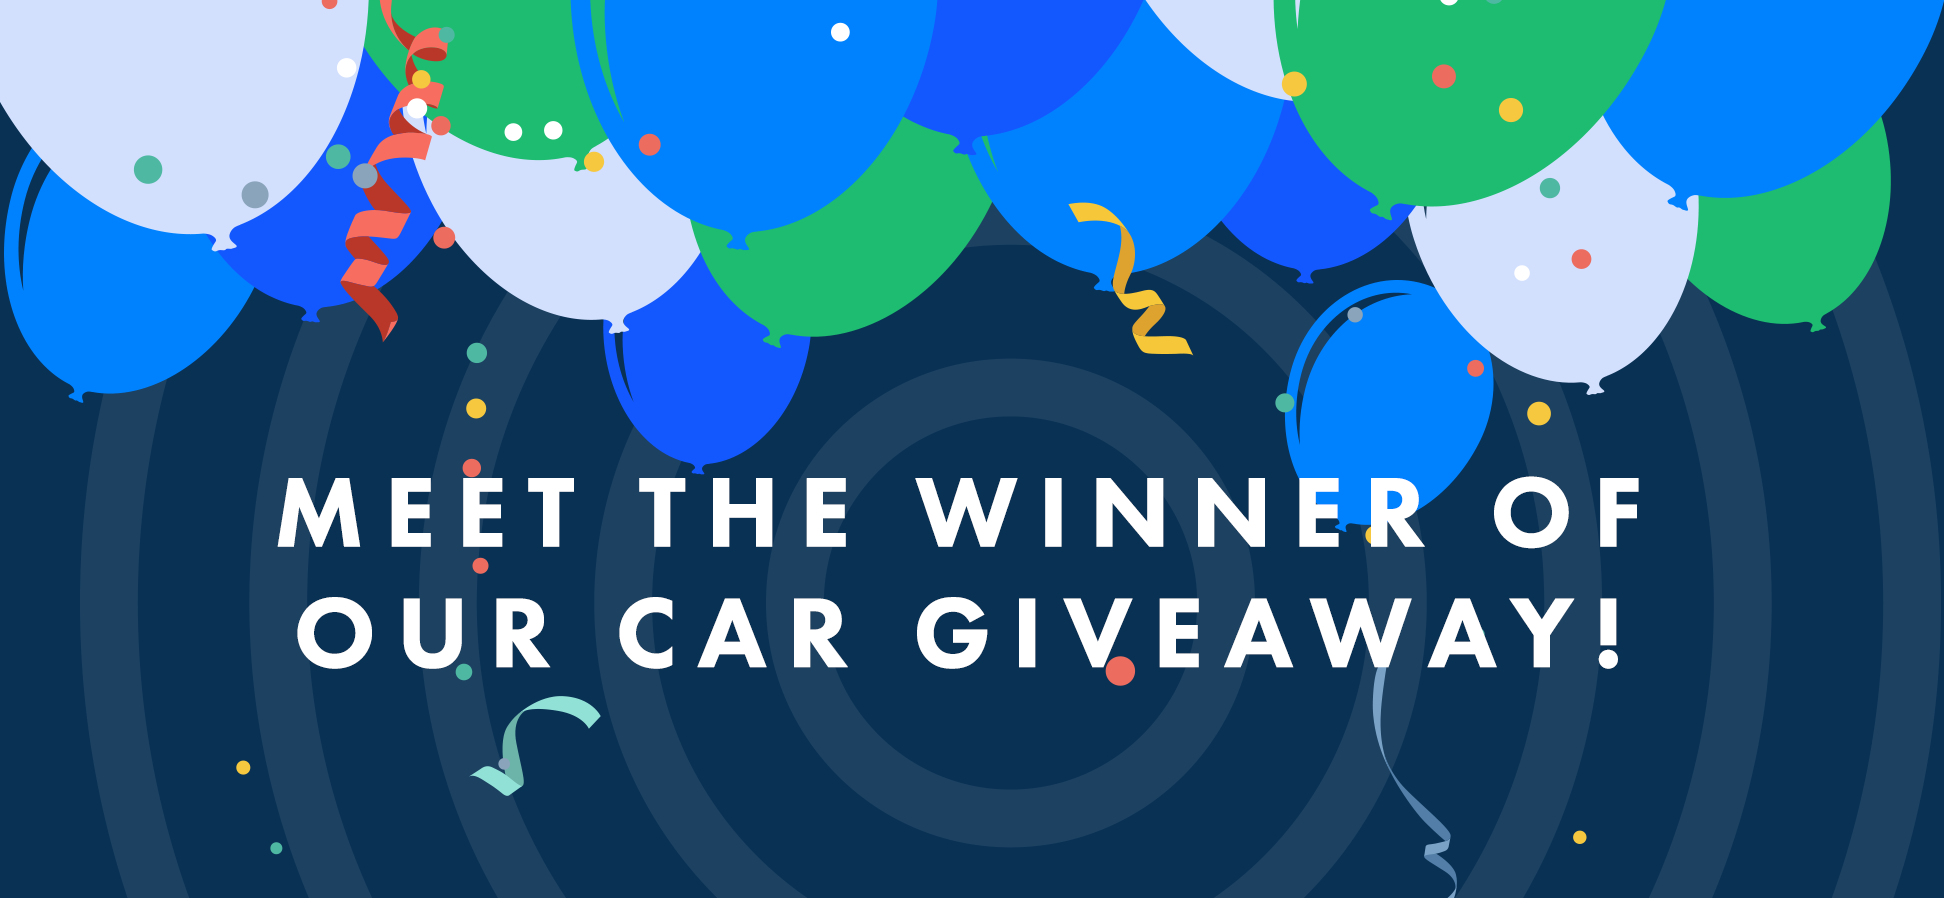 And the Winner of Our Car Giveaway is…